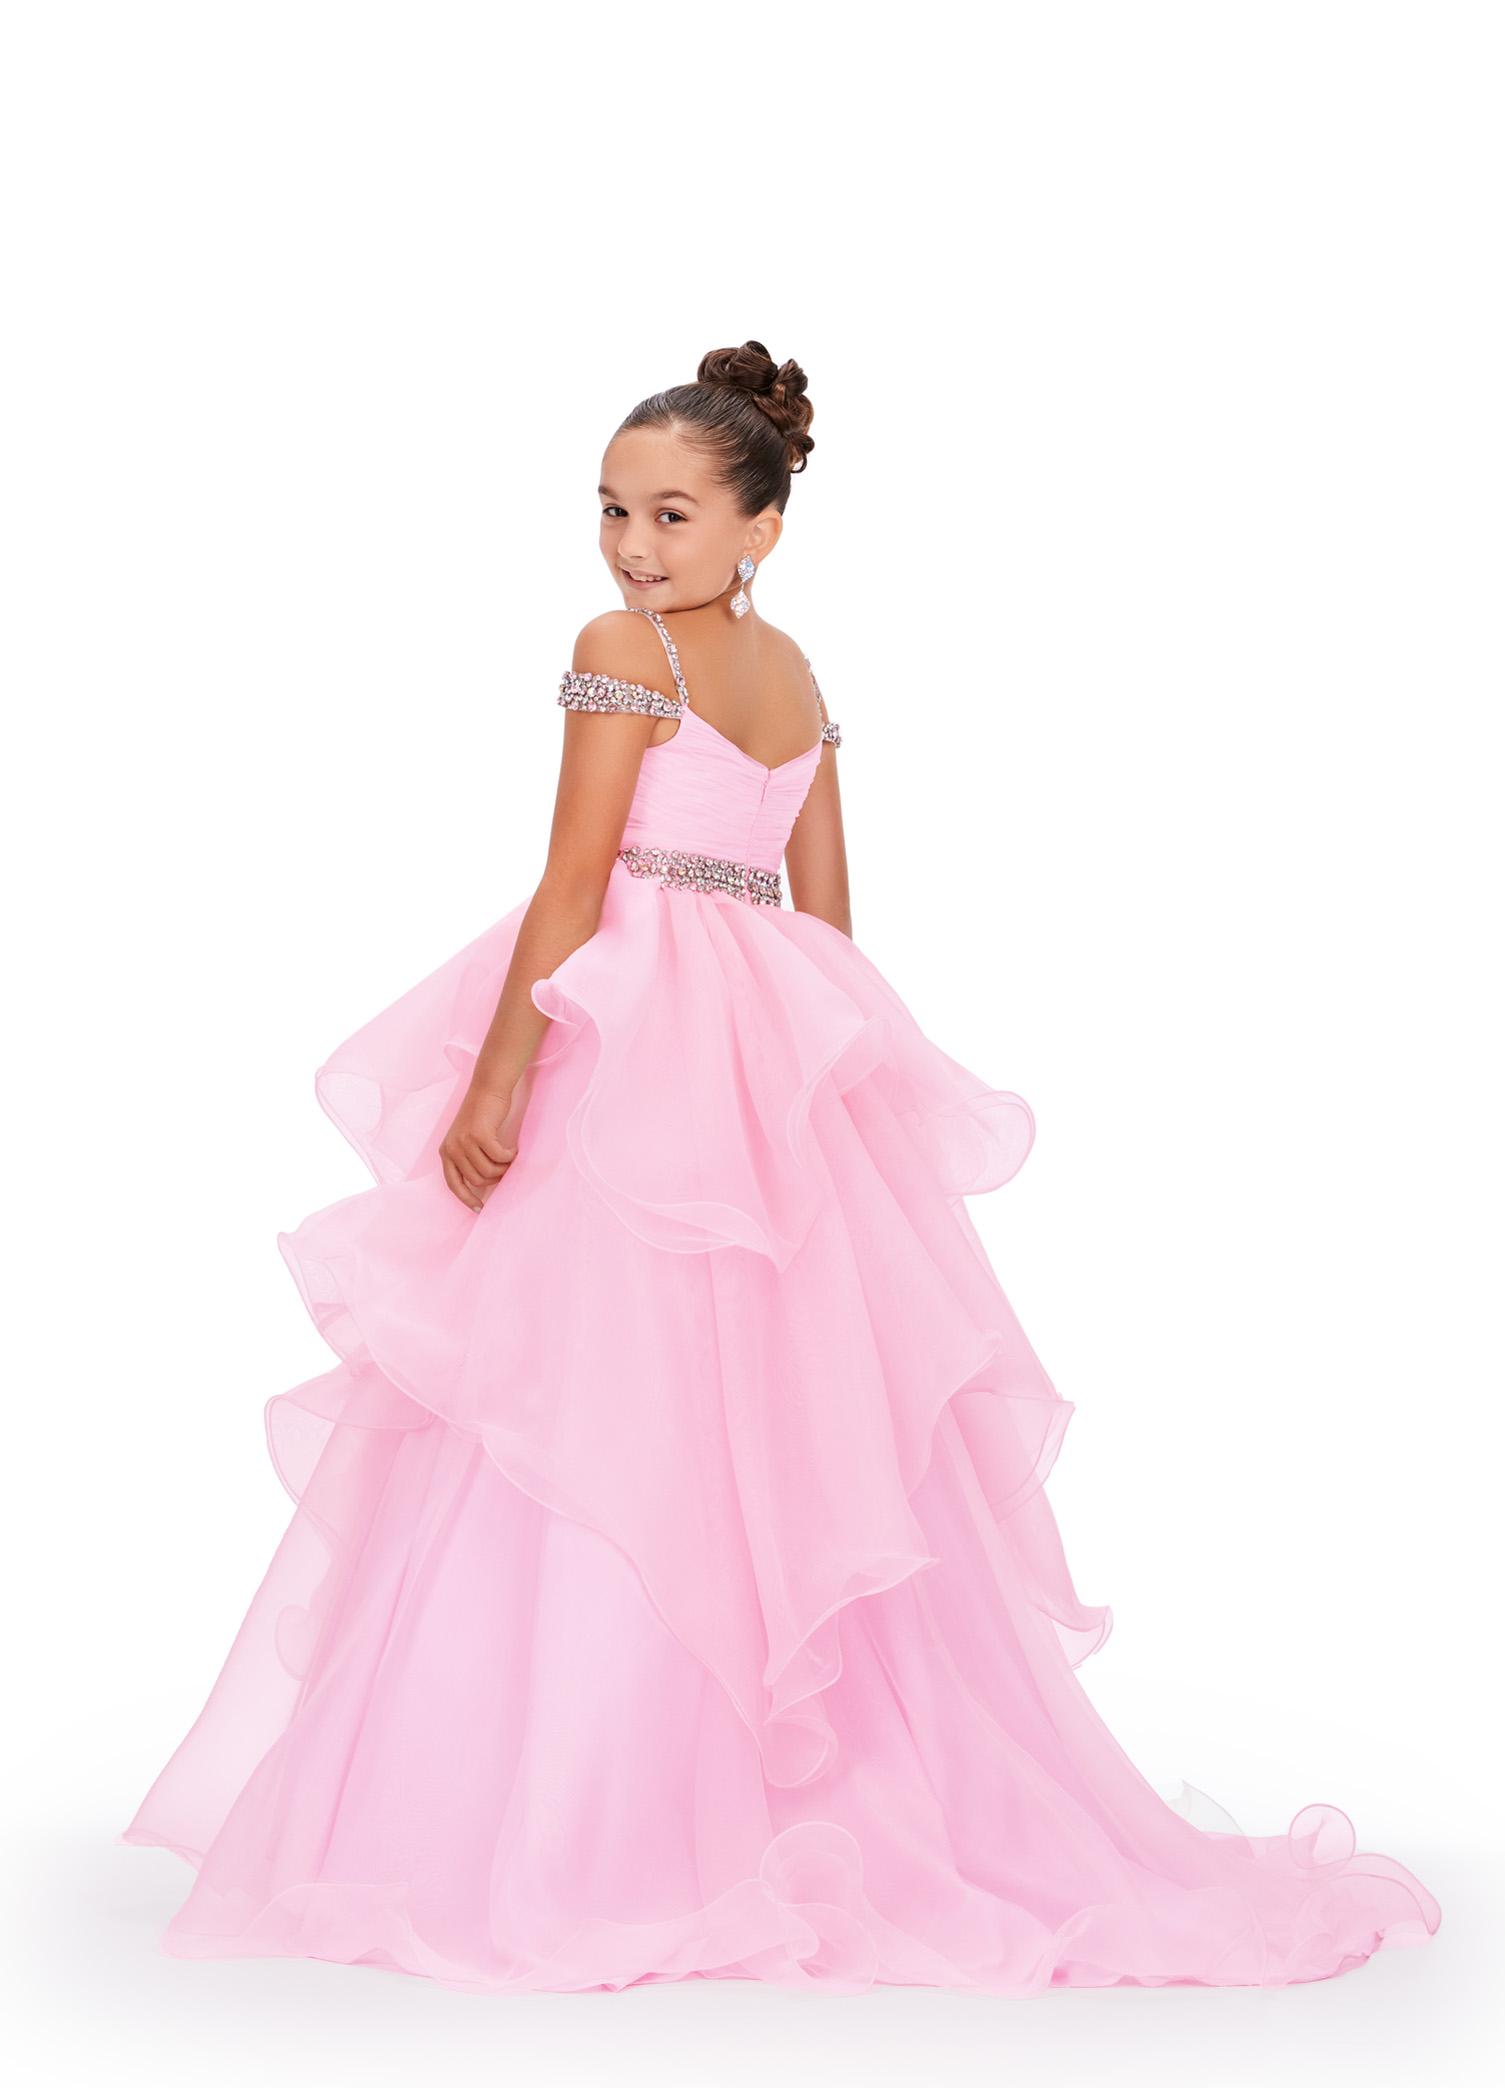 Kids Girls Princess Dress Bow Lace Ball Gown Party Pageant Prom Wedding  Dresses | eBay